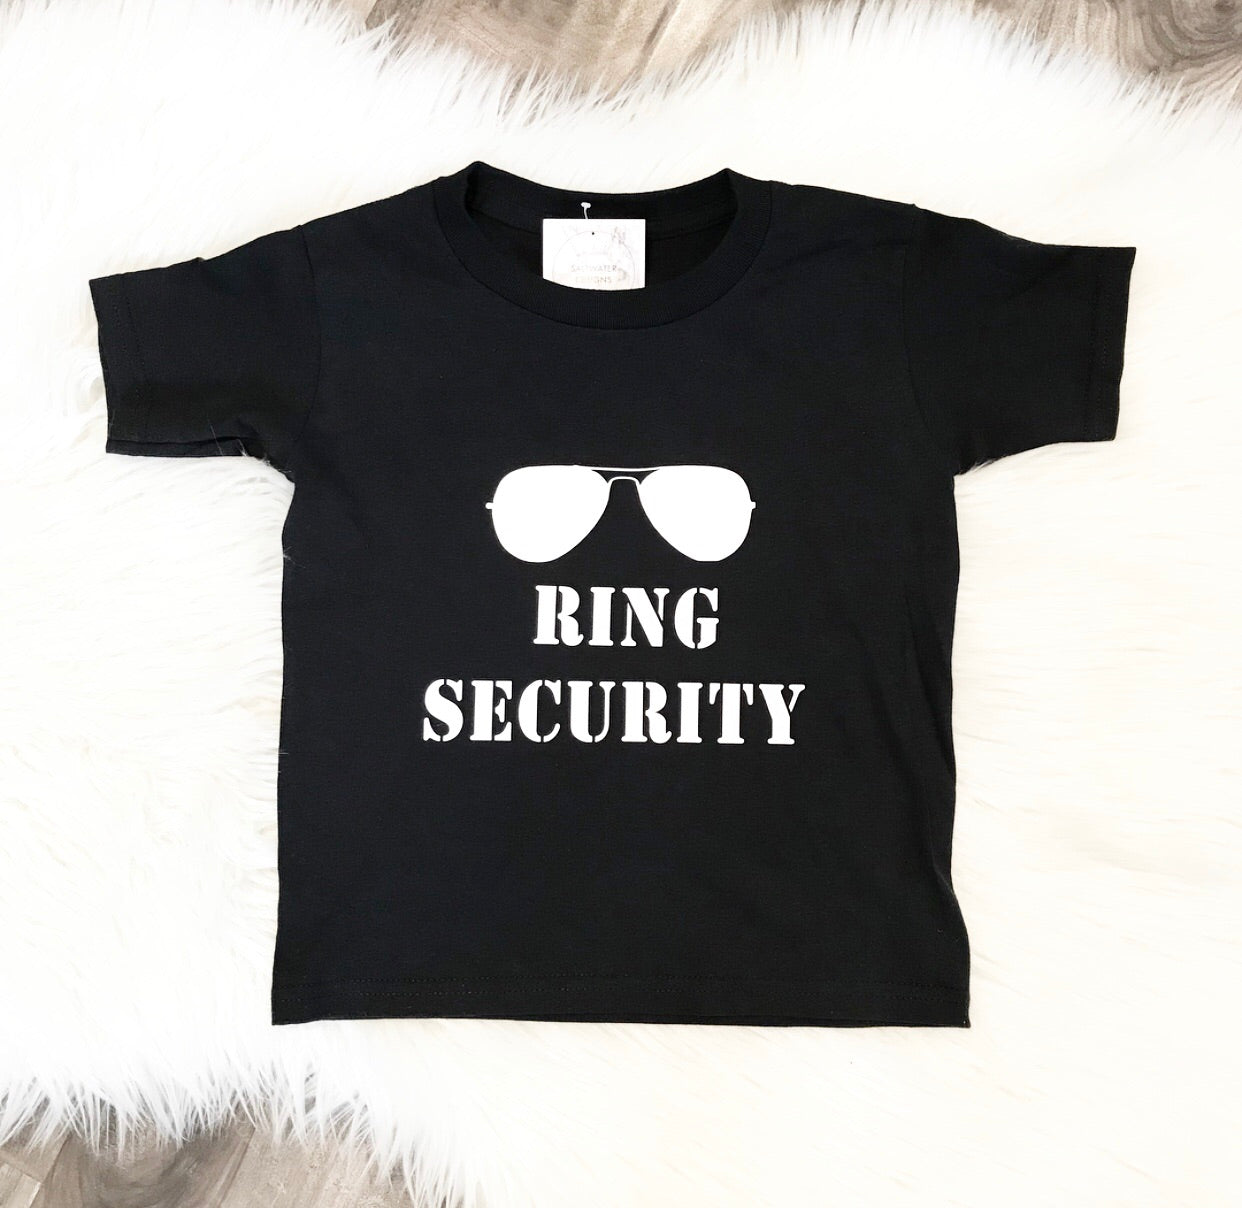 "Ring Security" Toddler/Youth T-Shirt